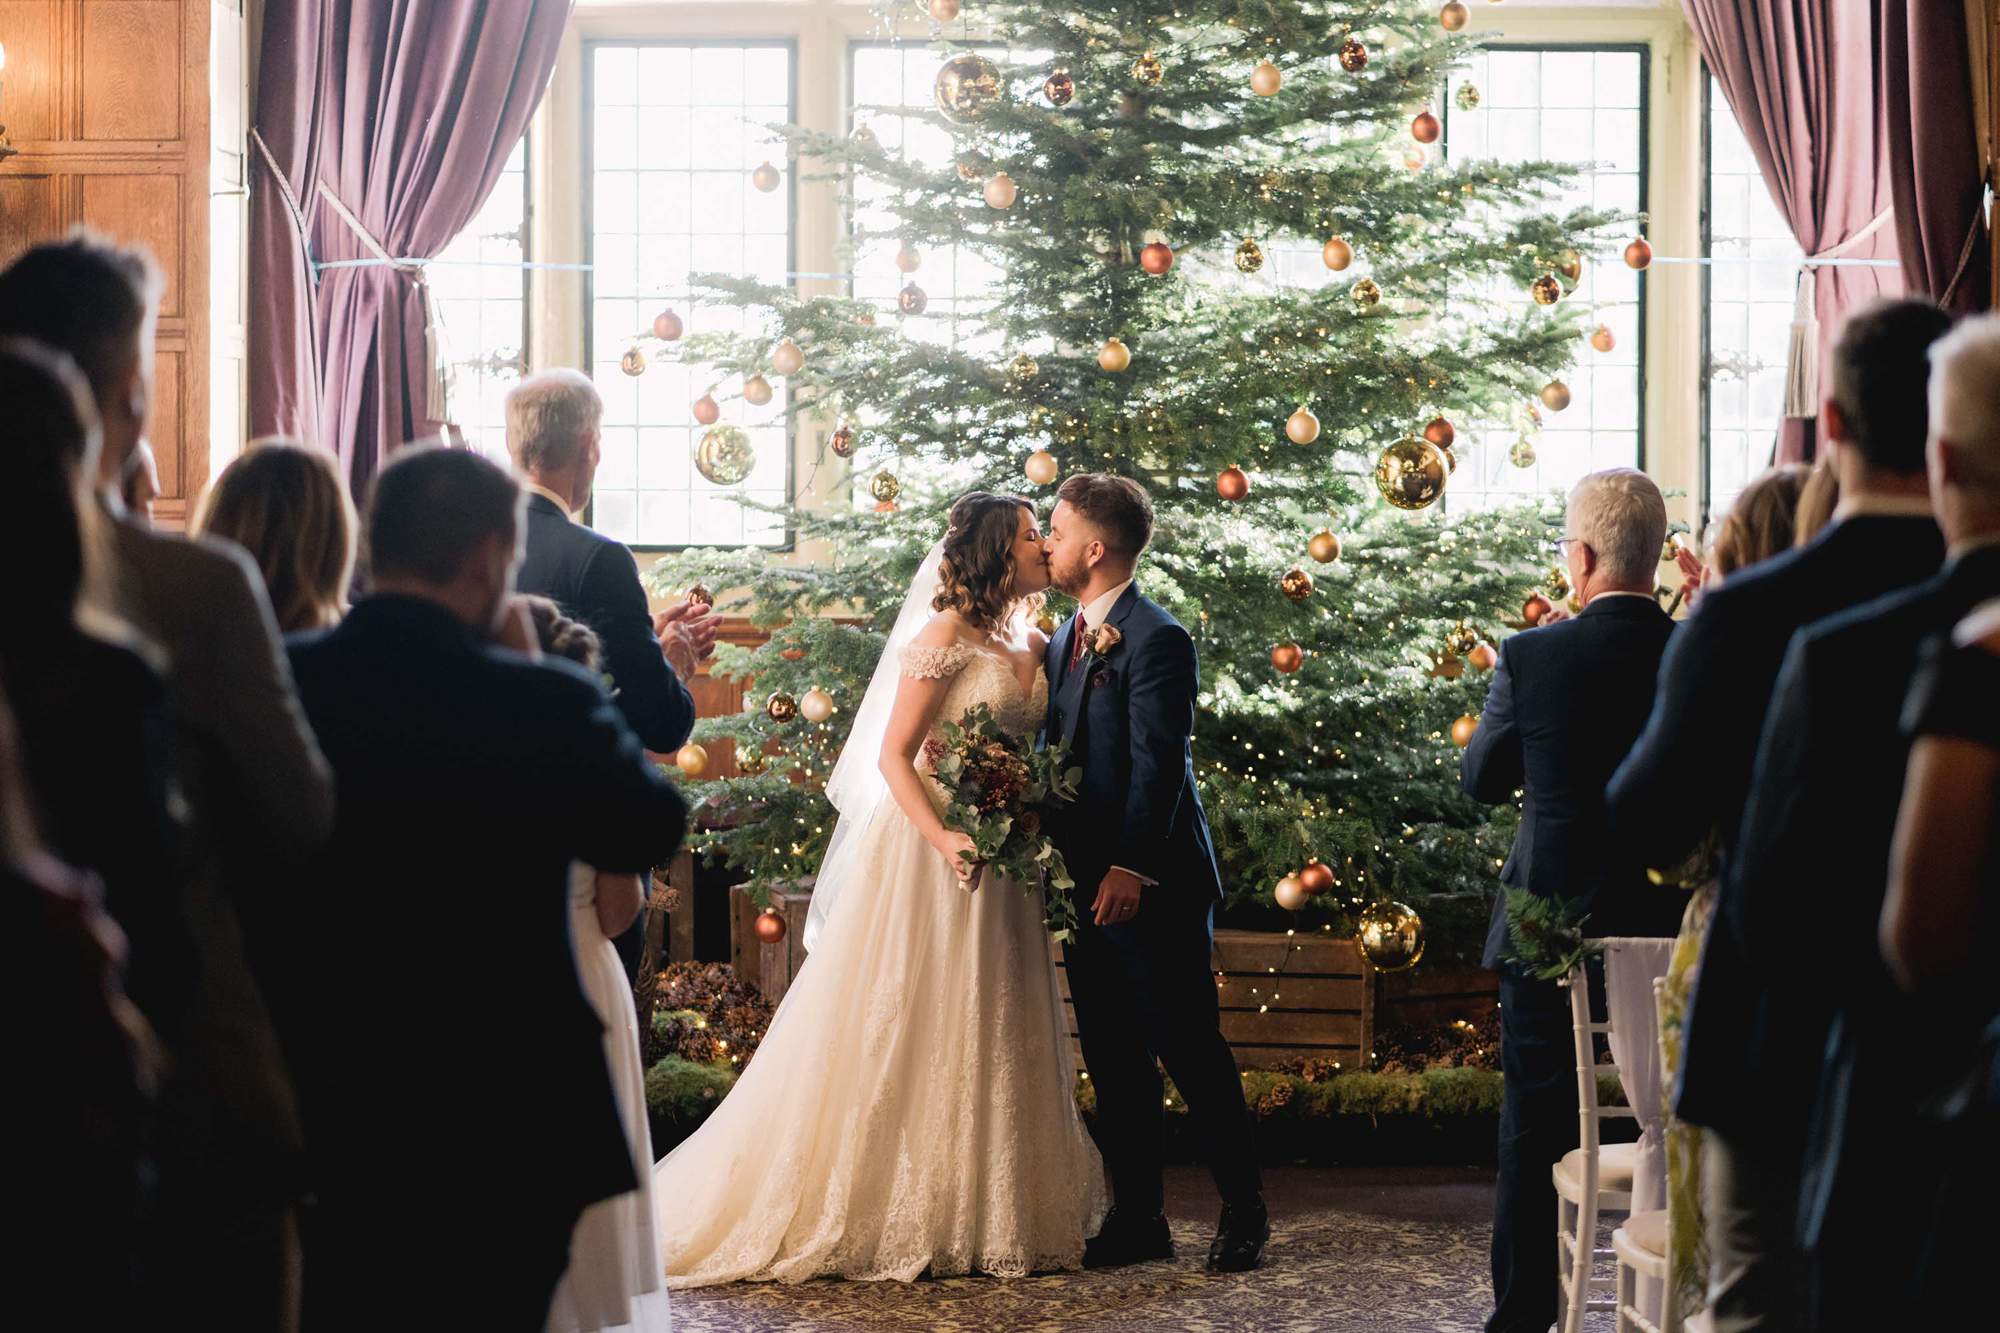 Bride and groom have their first kiss at Rhinefield House wedding venue in Hampshire.